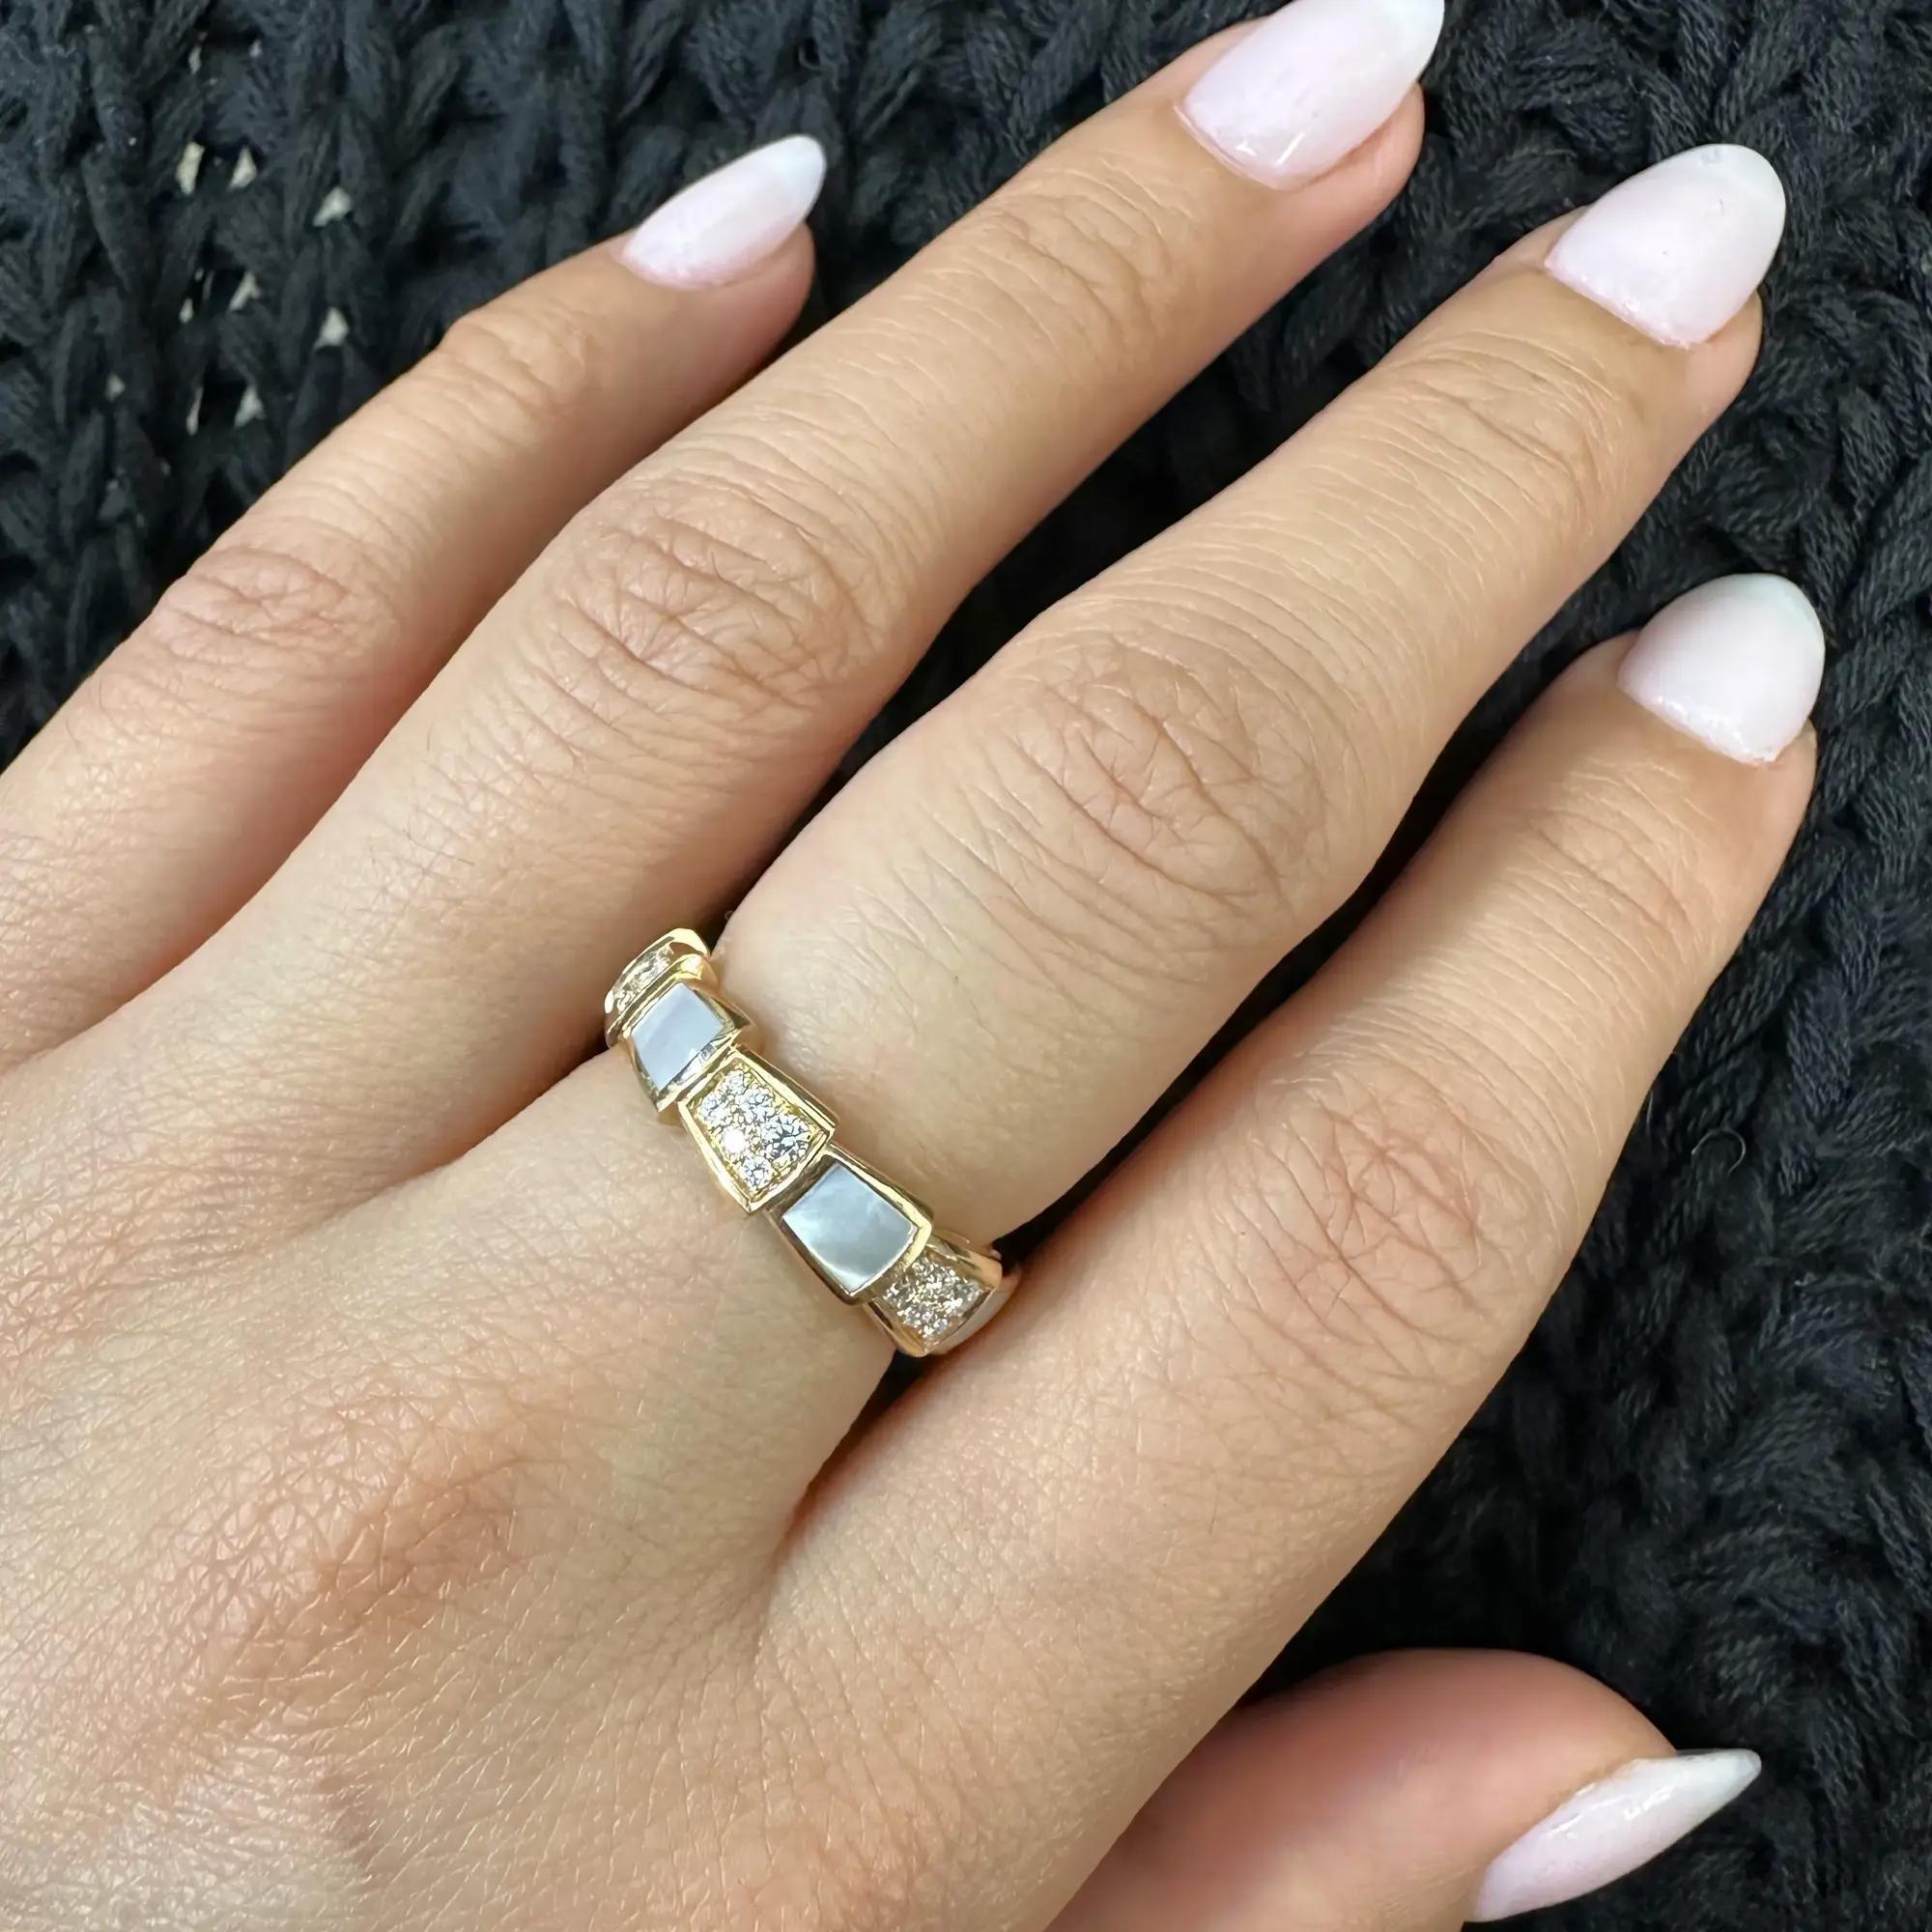 Sophisticated and glamorous, this Bvlgari ring coils around the finger striking with the precious beauty of the scales studded alternatively with Mother of pearl and round brilliant cut diamonds in pave setting. Total diamond weight: 0.34 carat.